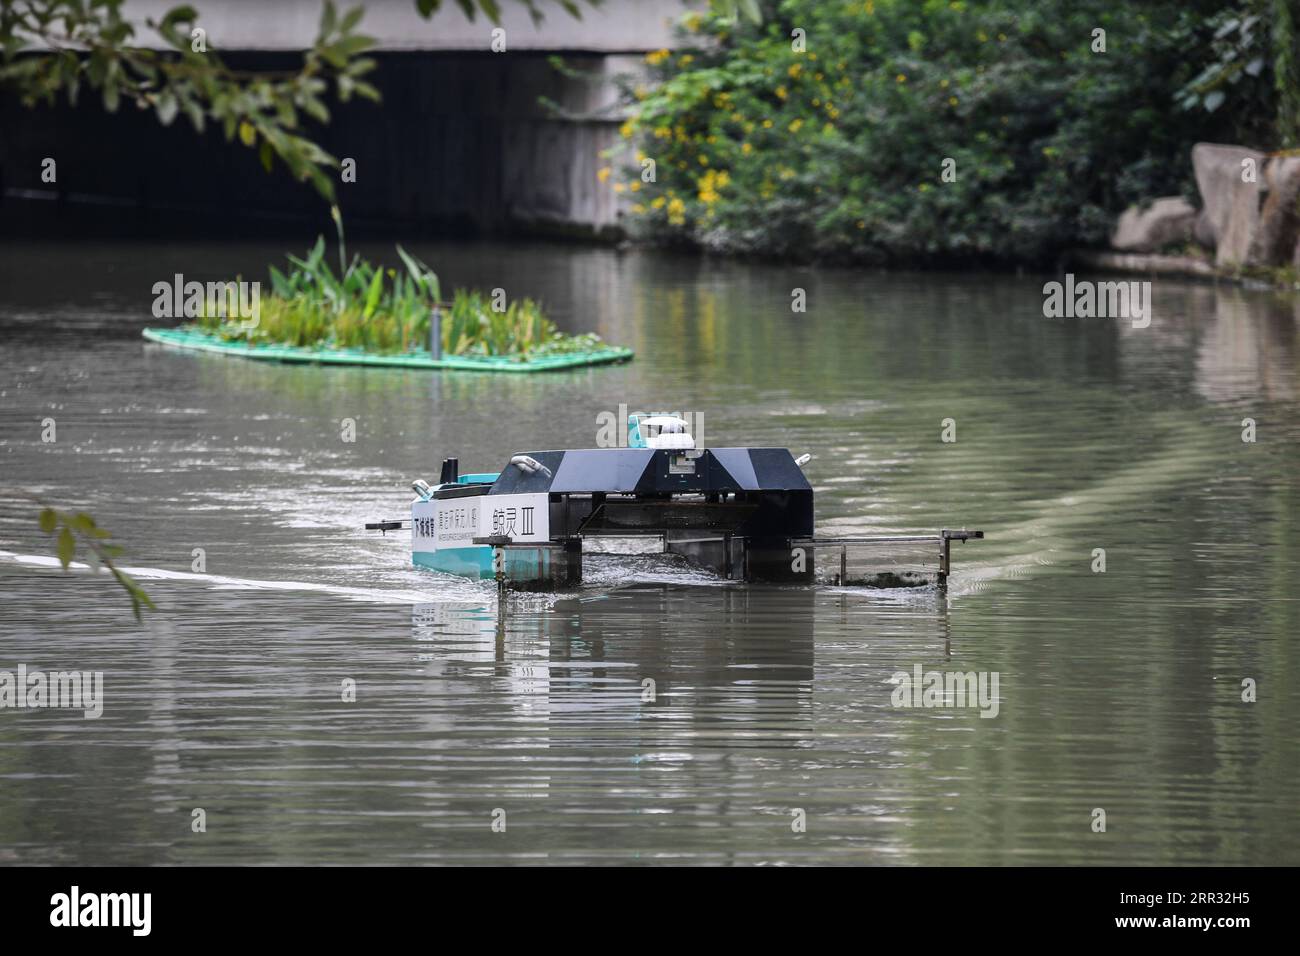 https://c8.alamy.com/comp/2RR32H5/201021-hangzhou-oct-21-2020-an-unmanned-patrolling-and-waste-collecting-machine-works-in-a-river-in-hangzhou-east-china-s-zhejiang-province-oct-21-2020-a-series-of-high-tech-measures-were-applied-to-improve-the-river-ecosystem-in-hangzhou-including-unmanned-boats-patrolling-automatic-watercourse-waste-cleaning-system-artificial-intelligence-ai-monitoring-system-etc-china-hangzhou-river-ecosystem-management-cn-xuxyu-publicationxnotxinxchn-2RR32H5.jpg